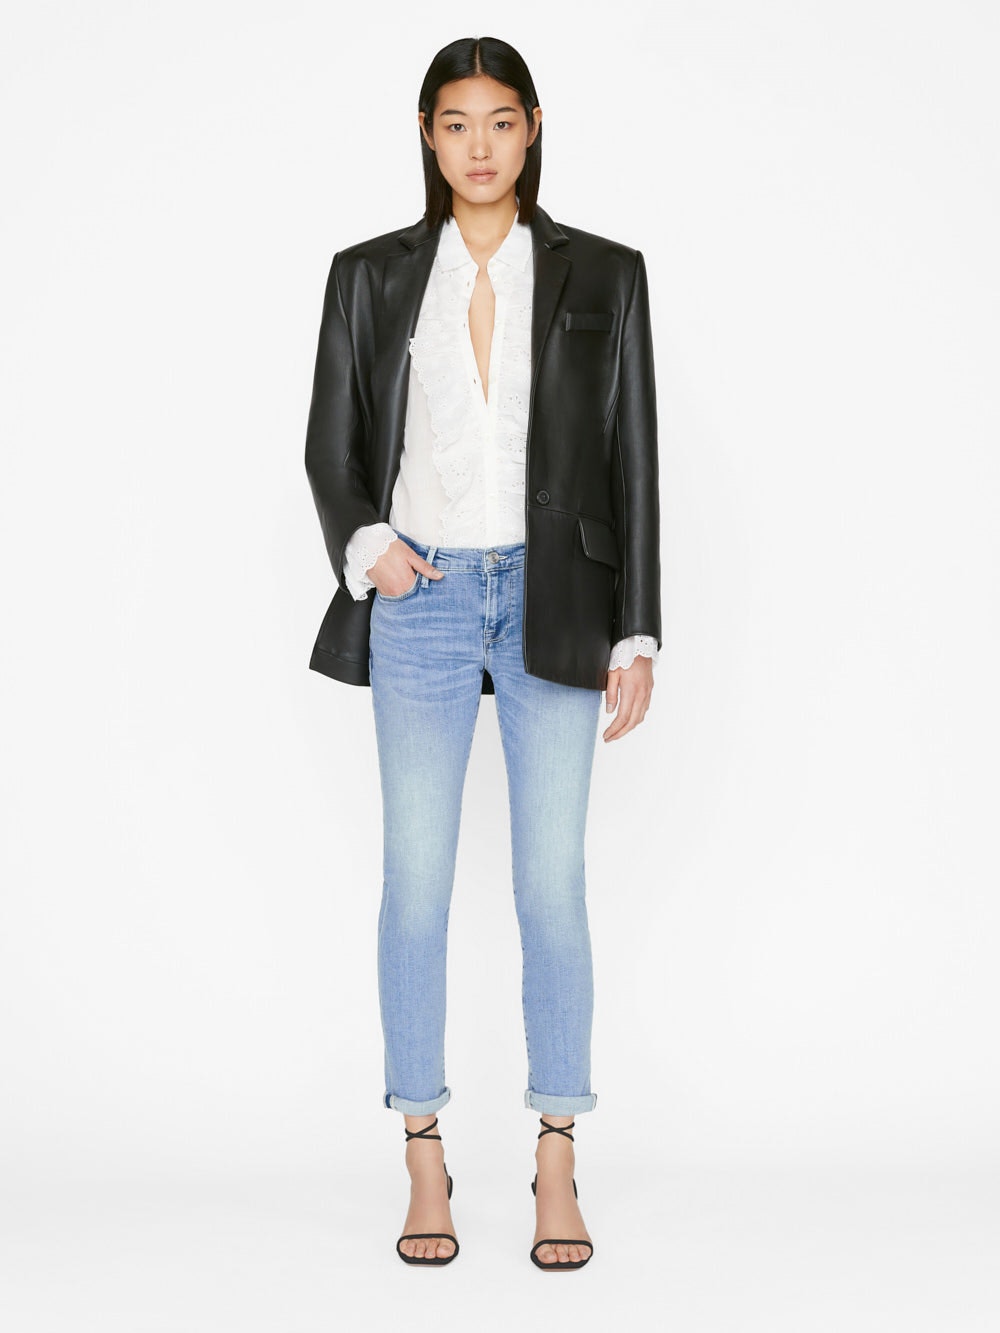 A model donning a comfortable Le Garcon - Galeston blazer from Frame with boyfriend jeans, a sustainable choice for fashion-forward individuals.